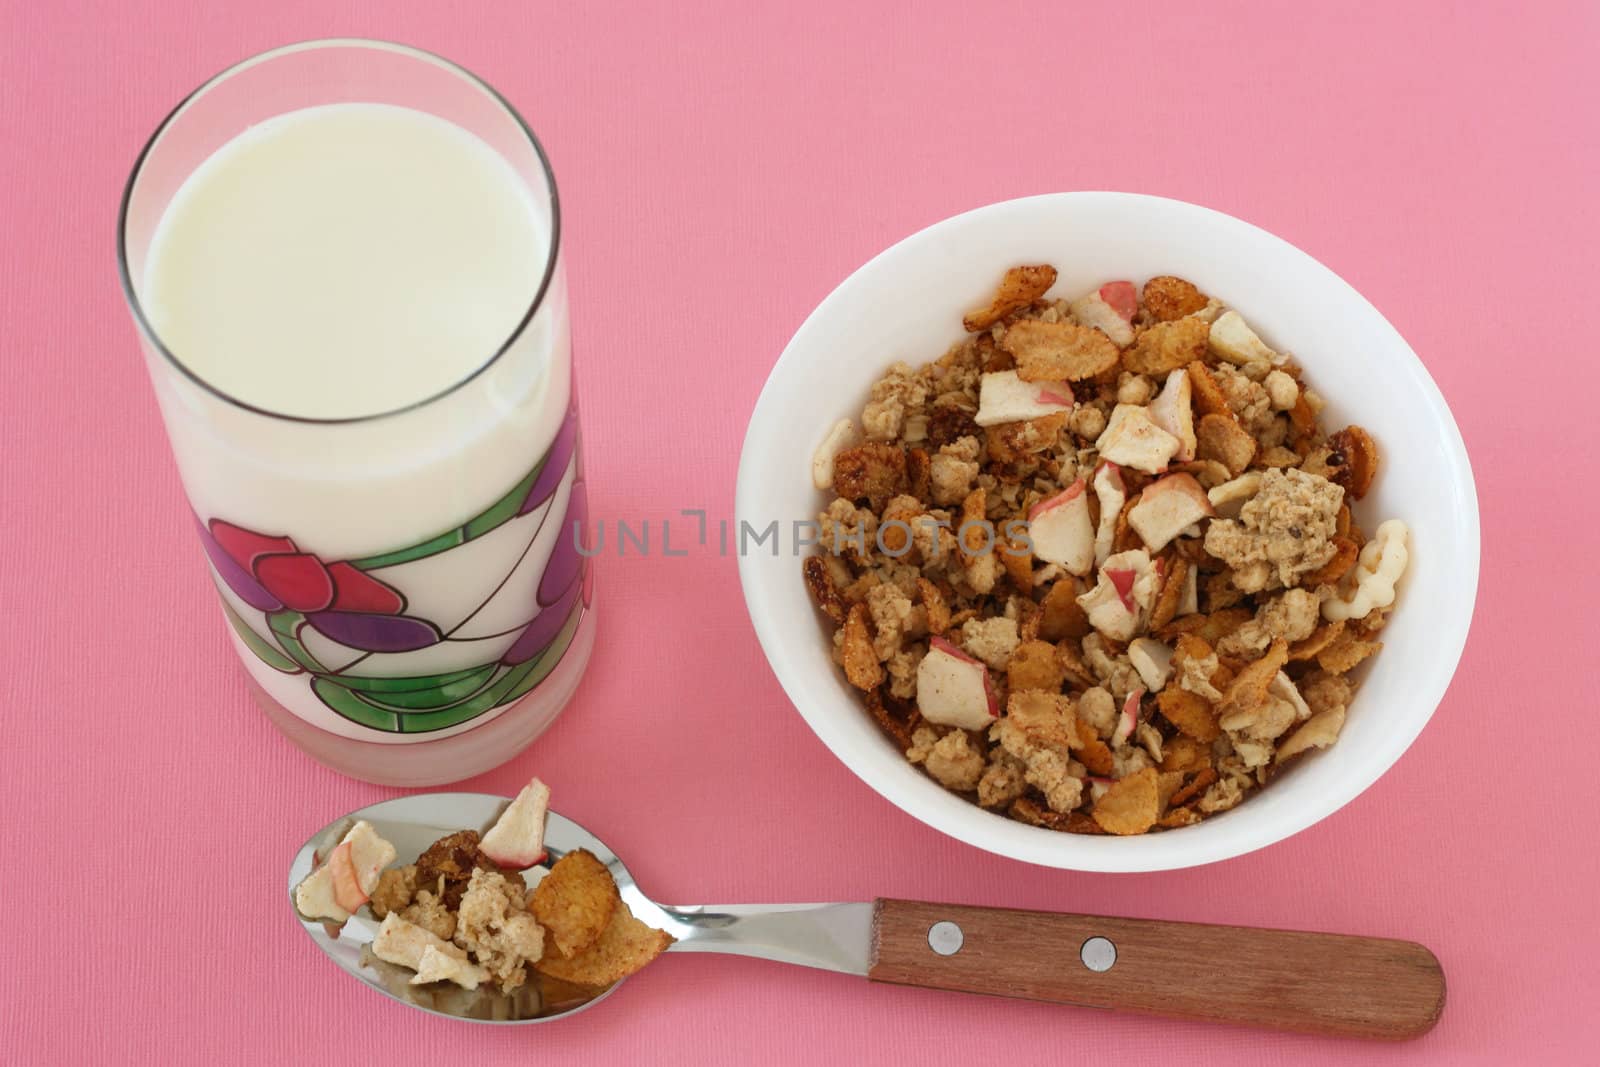 cereals with dry fruits in the bowl